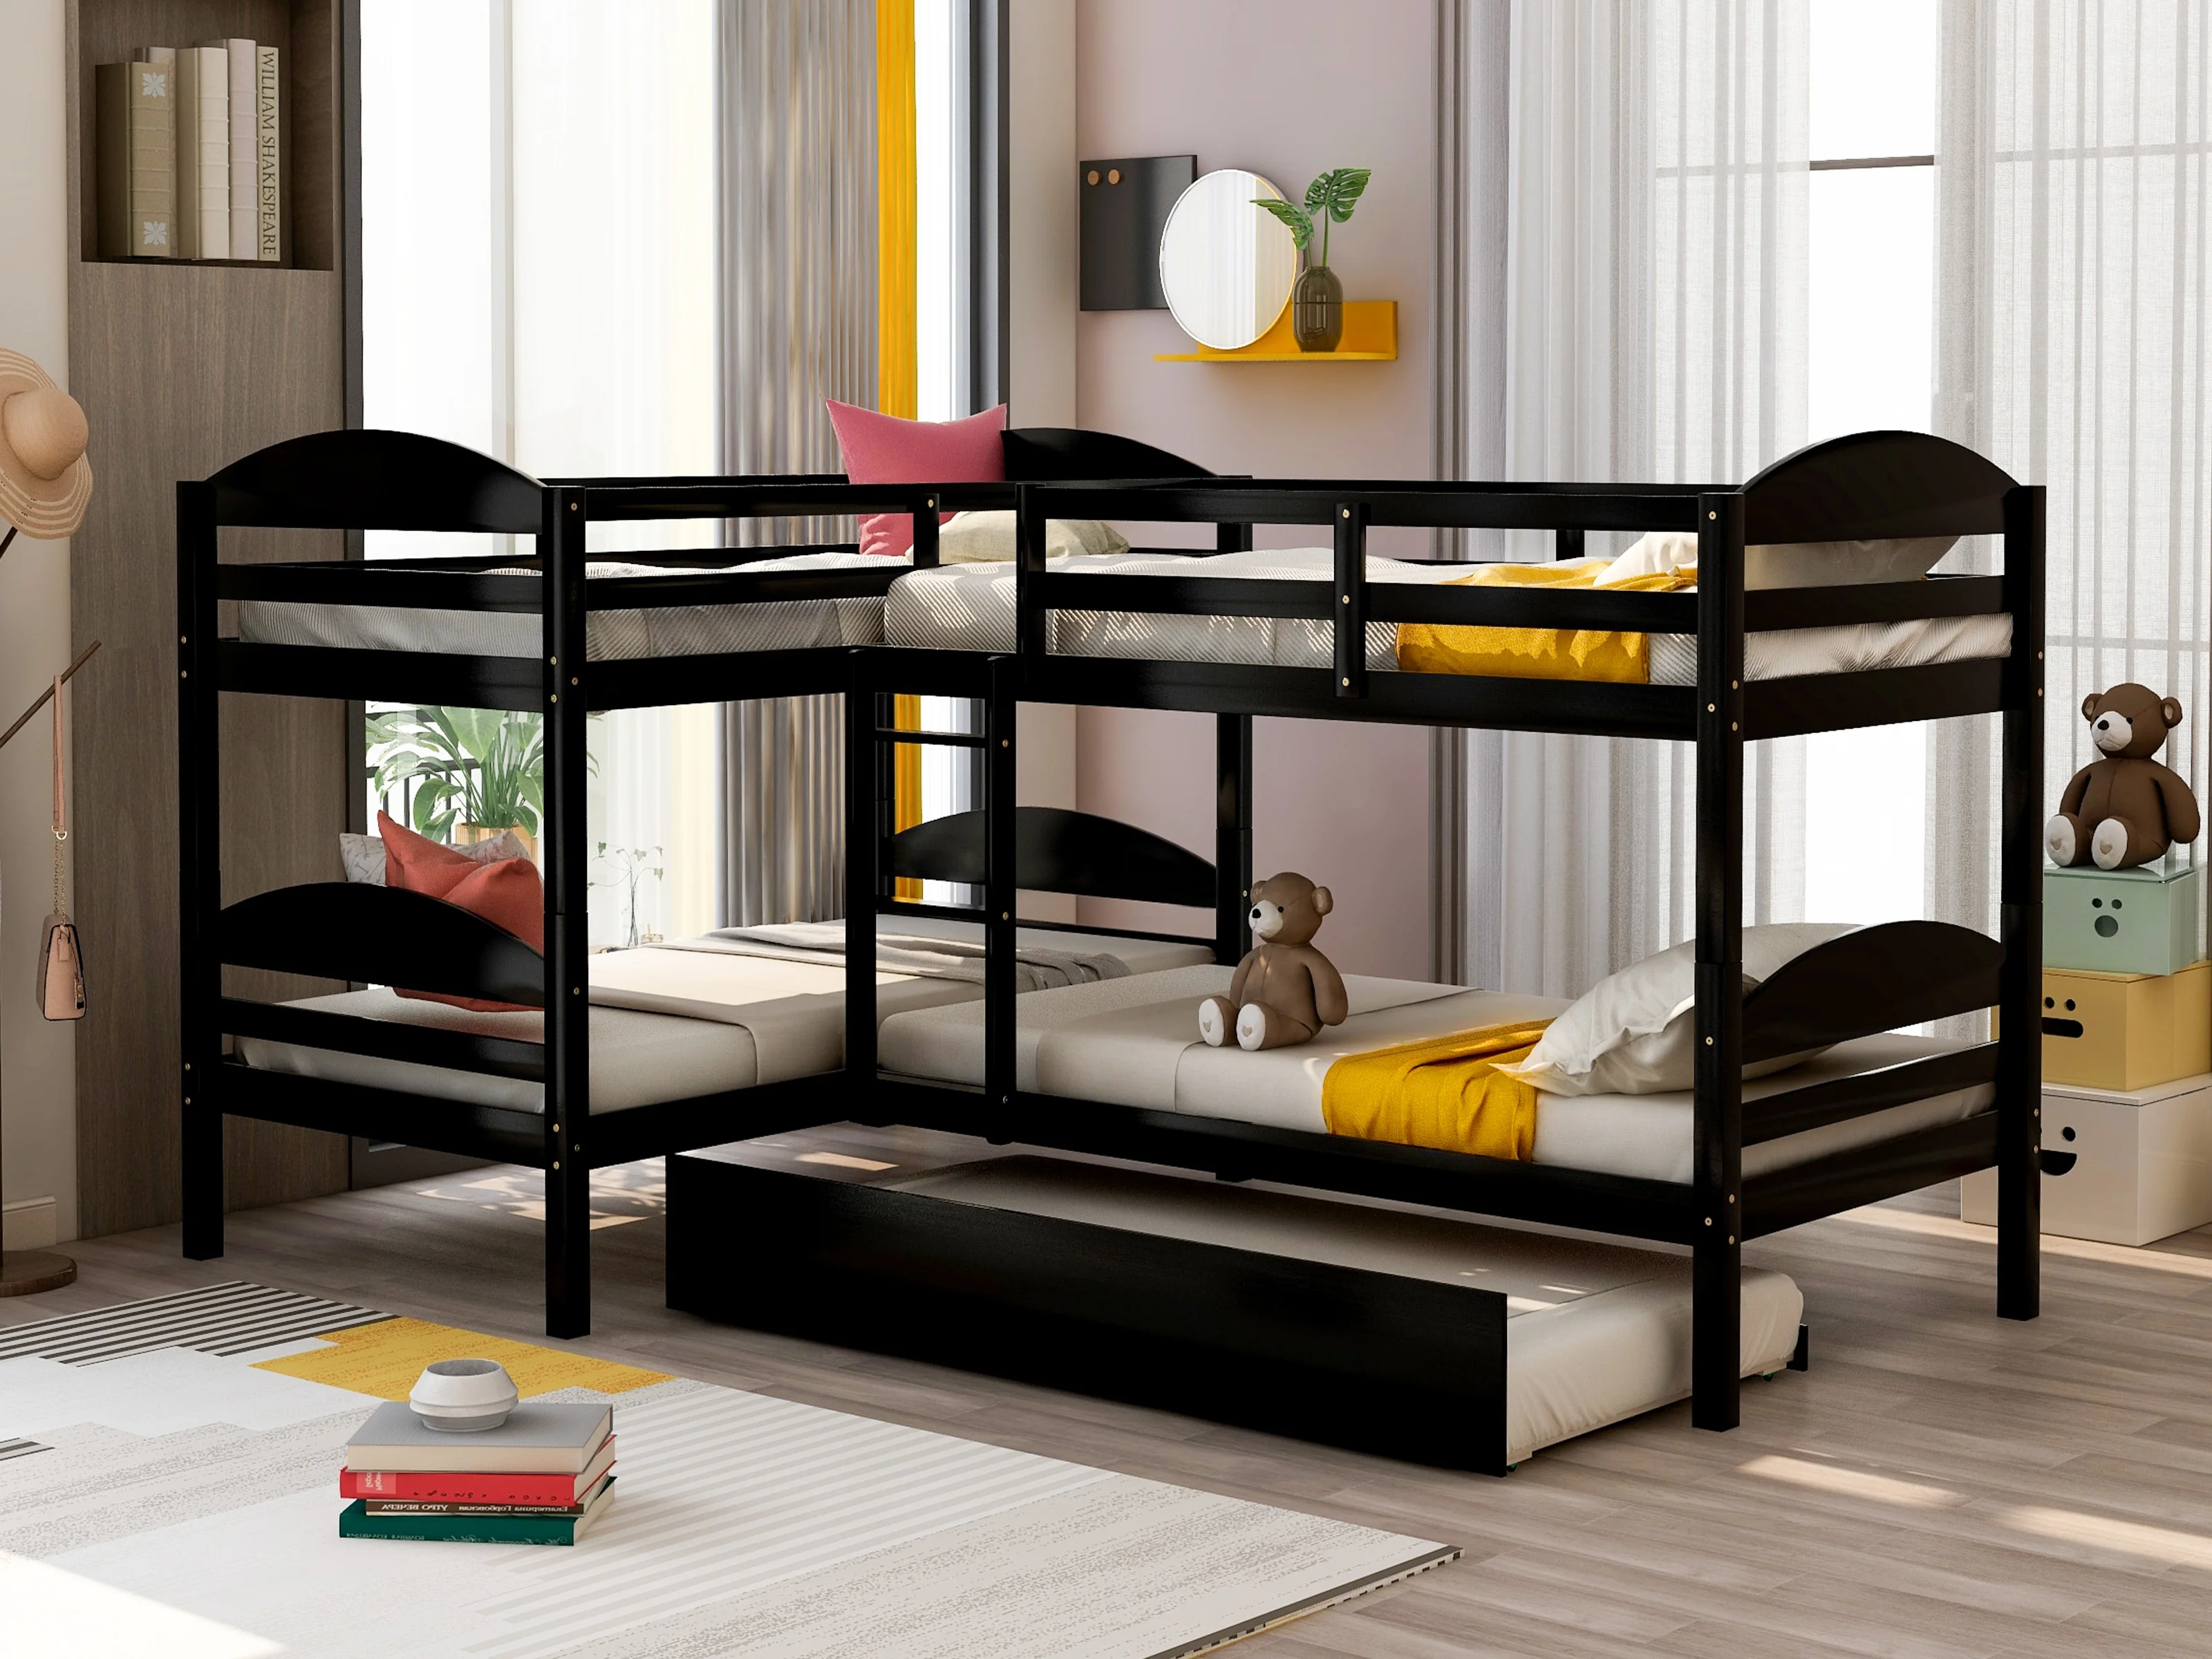 

119"L x 80"W Home Modern And Minimalist Wooden Bedroom Furniture Beds Frames Bases Twin L- Shaped Bunk Bed With Trundle Espresso